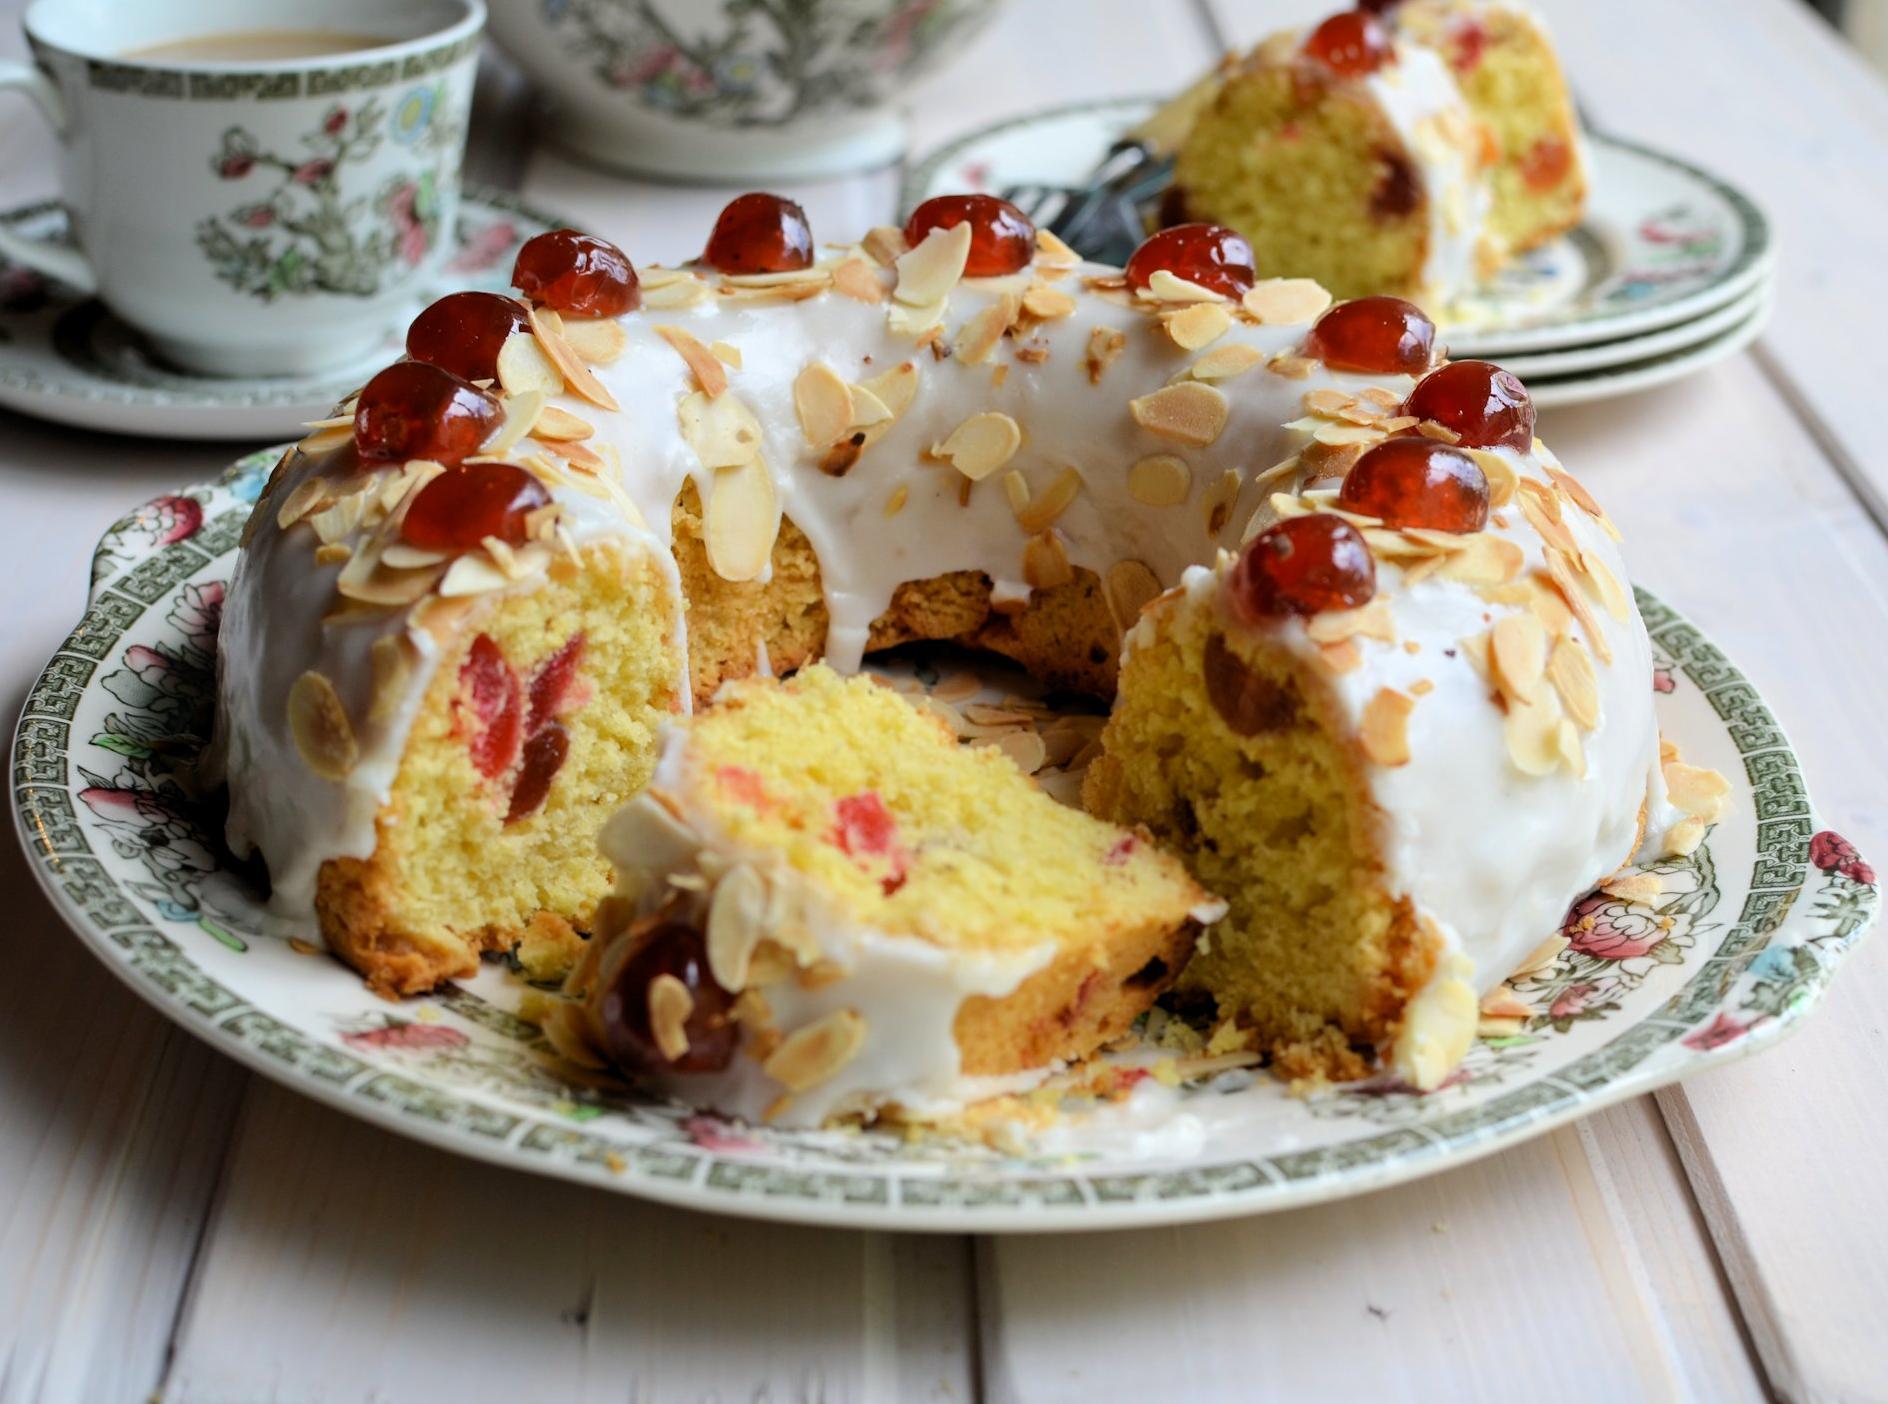  Whether as a dessert or a morning snack, this cherry cake is perfect for any occasion